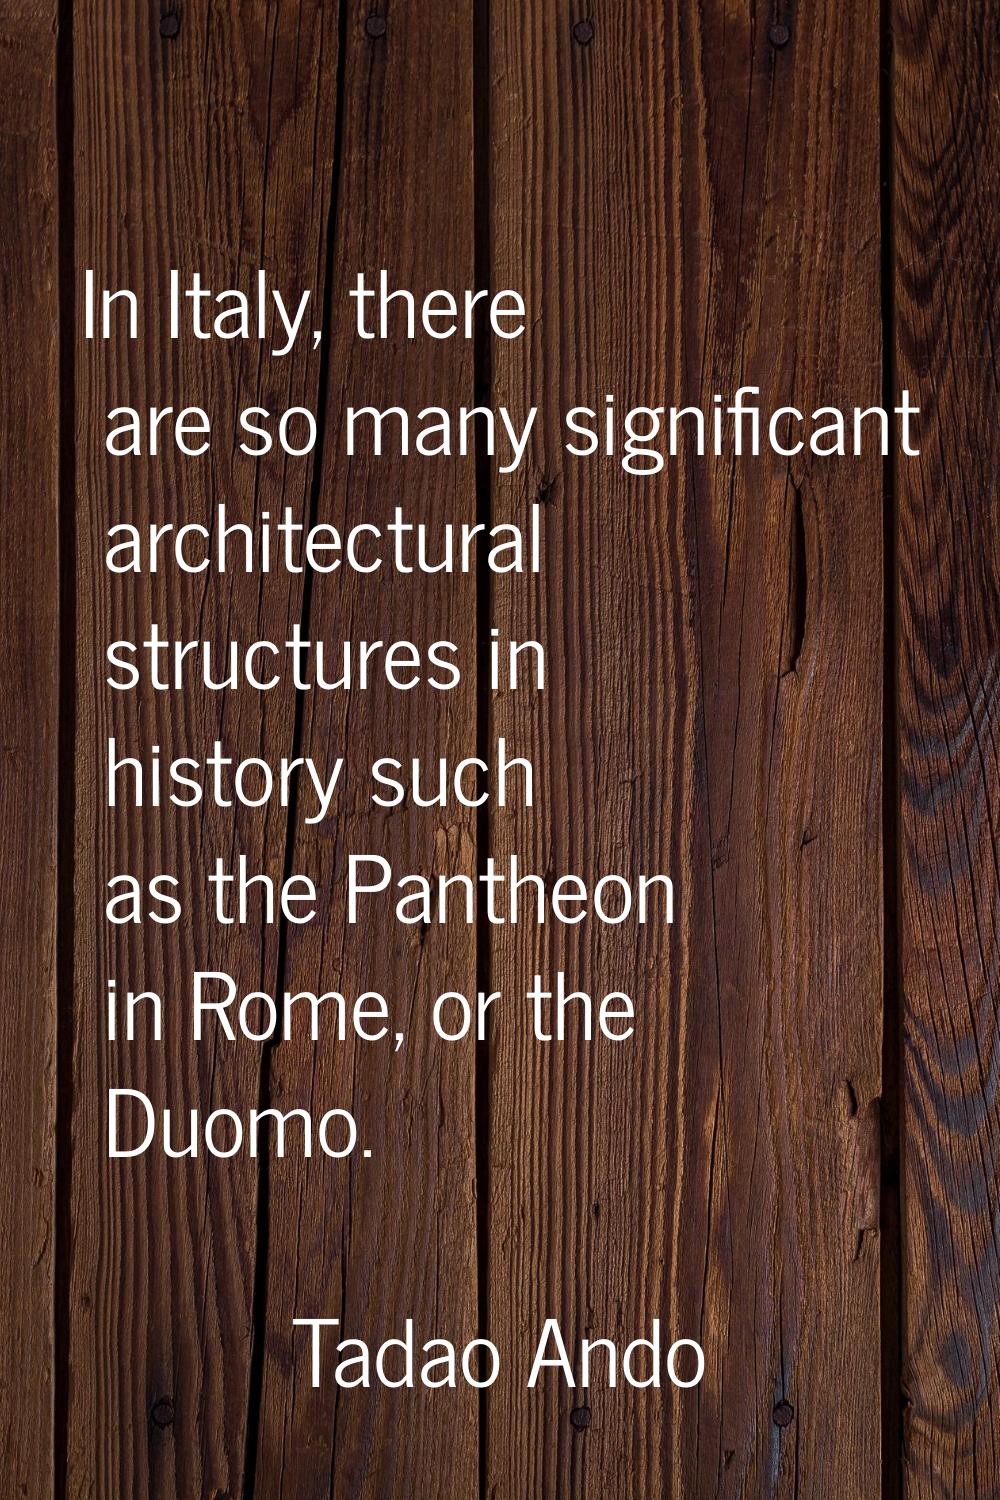 In Italy, there are so many significant architectural structures in history such as the Pantheon in